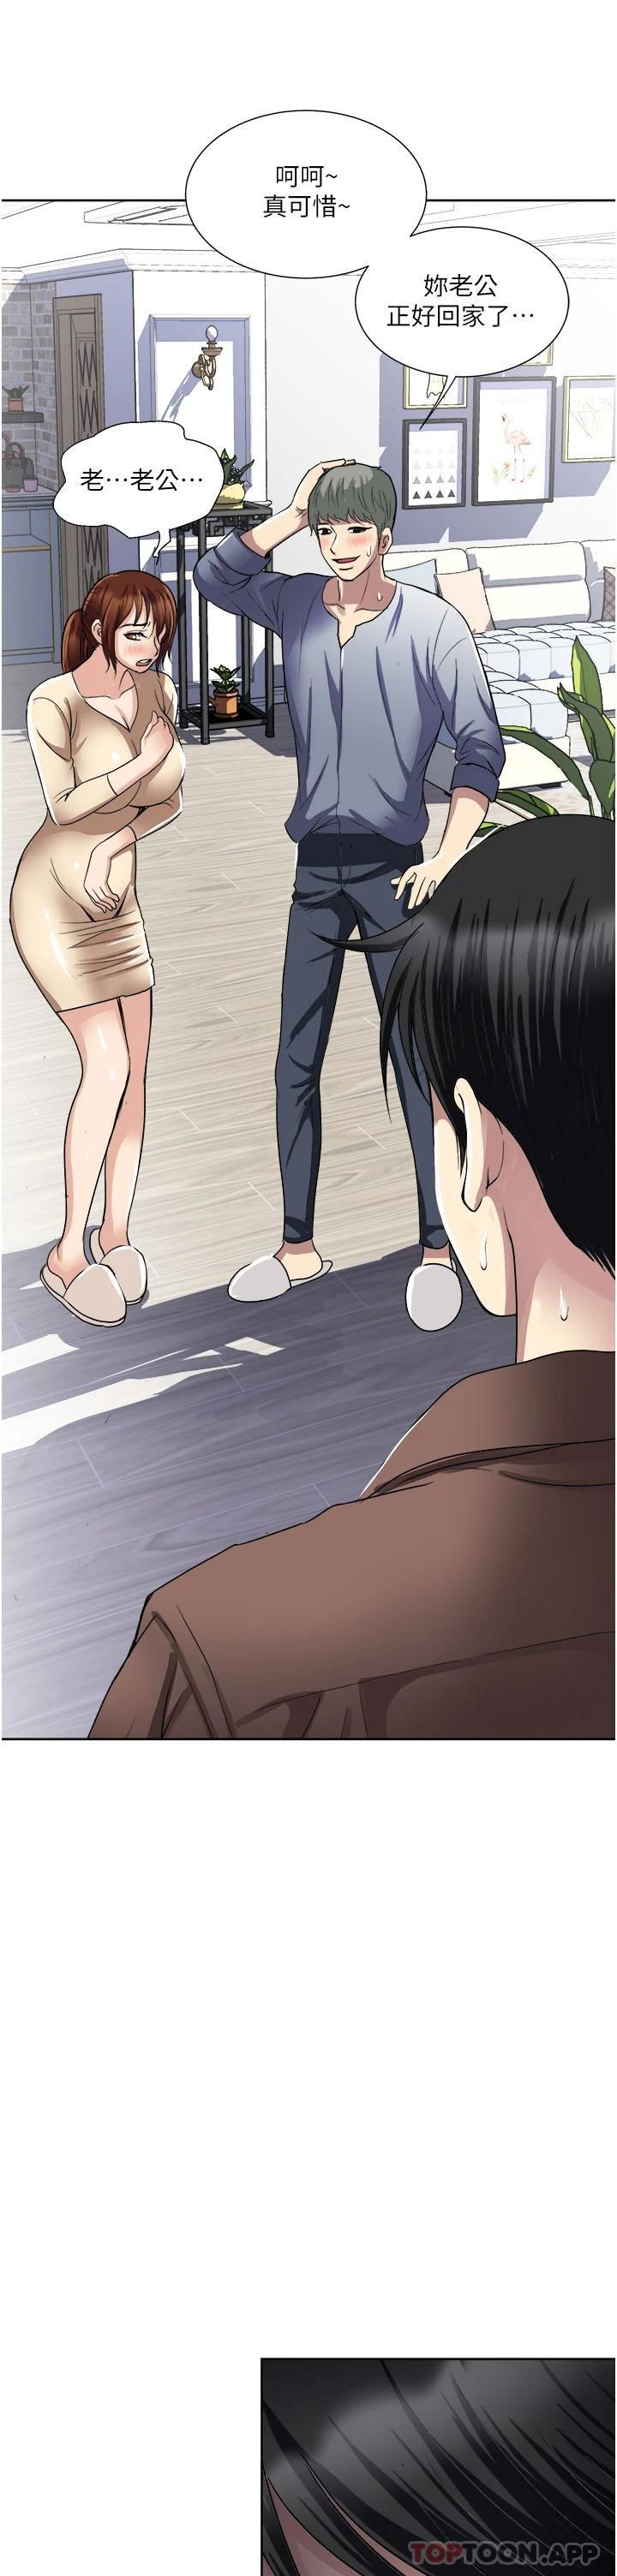 just-once-raw-chap-33-2